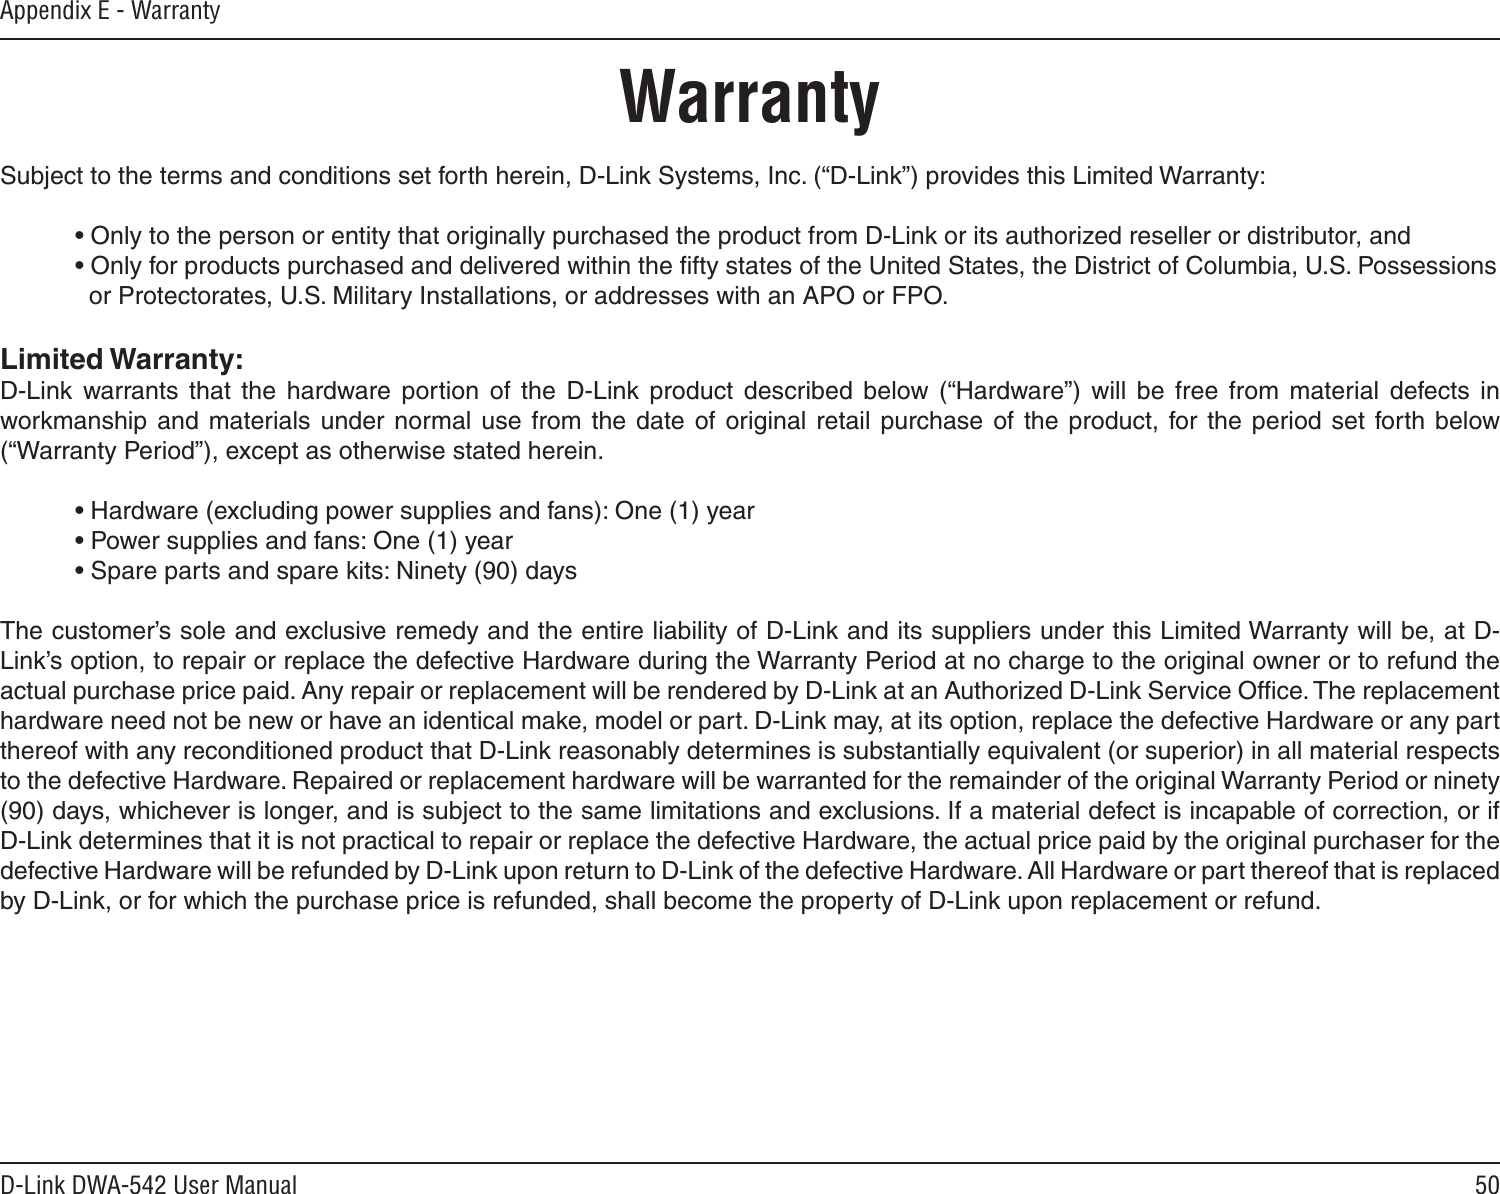 50D-Link DWA-542 User ManualAppendix E - WarrantyWarrantySubject to the terms and conditions set forth herein, D-Link Systems, Inc. (“D-Link”) provides this Limited Warranty:  • Only to the person or entity that originally purchased the product from D-Link or its authorized reseller or distributor, and  • Only for products purchased and delivered within the ﬁfty states of the United States, the District of Columbia, U.S. Possessions      or Protectorates, U.S. Military Installations, or addresses with an APO or FPO.Limited Warranty:D-Link  warrants that  the  hardware  portion  of  the  D-Link  product  described  below  (“Hardware”)  will  be  free  from  material  defects  in workmanship  and materials under  normal use  from the  date  of original retail  purchase of  the product, for the period set  forth  below (“Warranty Period”), except as otherwise stated herein.  • Hardware (excluding power supplies and fans): One (1) year  • Power supplies and fans: One (1) year  • Spare parts and spare kits: Ninety (90) daysThe customer’s sole and exclusive remedy and the entire liability of D-Link and its suppliers under this Limited Warranty will be, at D-Link’s option, to repair or replace the defective Hardware during the Warranty Period at no charge to the original owner or to refund the actual purchase price paid. Any repair or replacement will be rendered by D-Link at an Authorized D-Link Service Ofﬁce. The replacement hardware need not be new or have an identical make, model or part. D-Link may, at its option, replace the defective Hardware or any part thereof with any reconditioned product that D-Link reasonably determines is substantially equivalent (or superior) in all material respects to the defective Hardware. Repaired or replacement hardware will be warranted for the remainder of the original Warranty Period or ninety (90) days, whichever is longer, and is subject to the same limitations and exclusions. If a material defect is incapable of correction, or if D-Link determines that it is not practical to repair or replace the defective Hardware, the actual price paid by the original purchaser for the defective Hardware will be refunded by D-Link upon return to D-Link of the defective Hardware. All Hardware or part thereof that is replaced by D-Link, or for which the purchase price is refunded, shall become the property of D-Link upon replacement or refund.